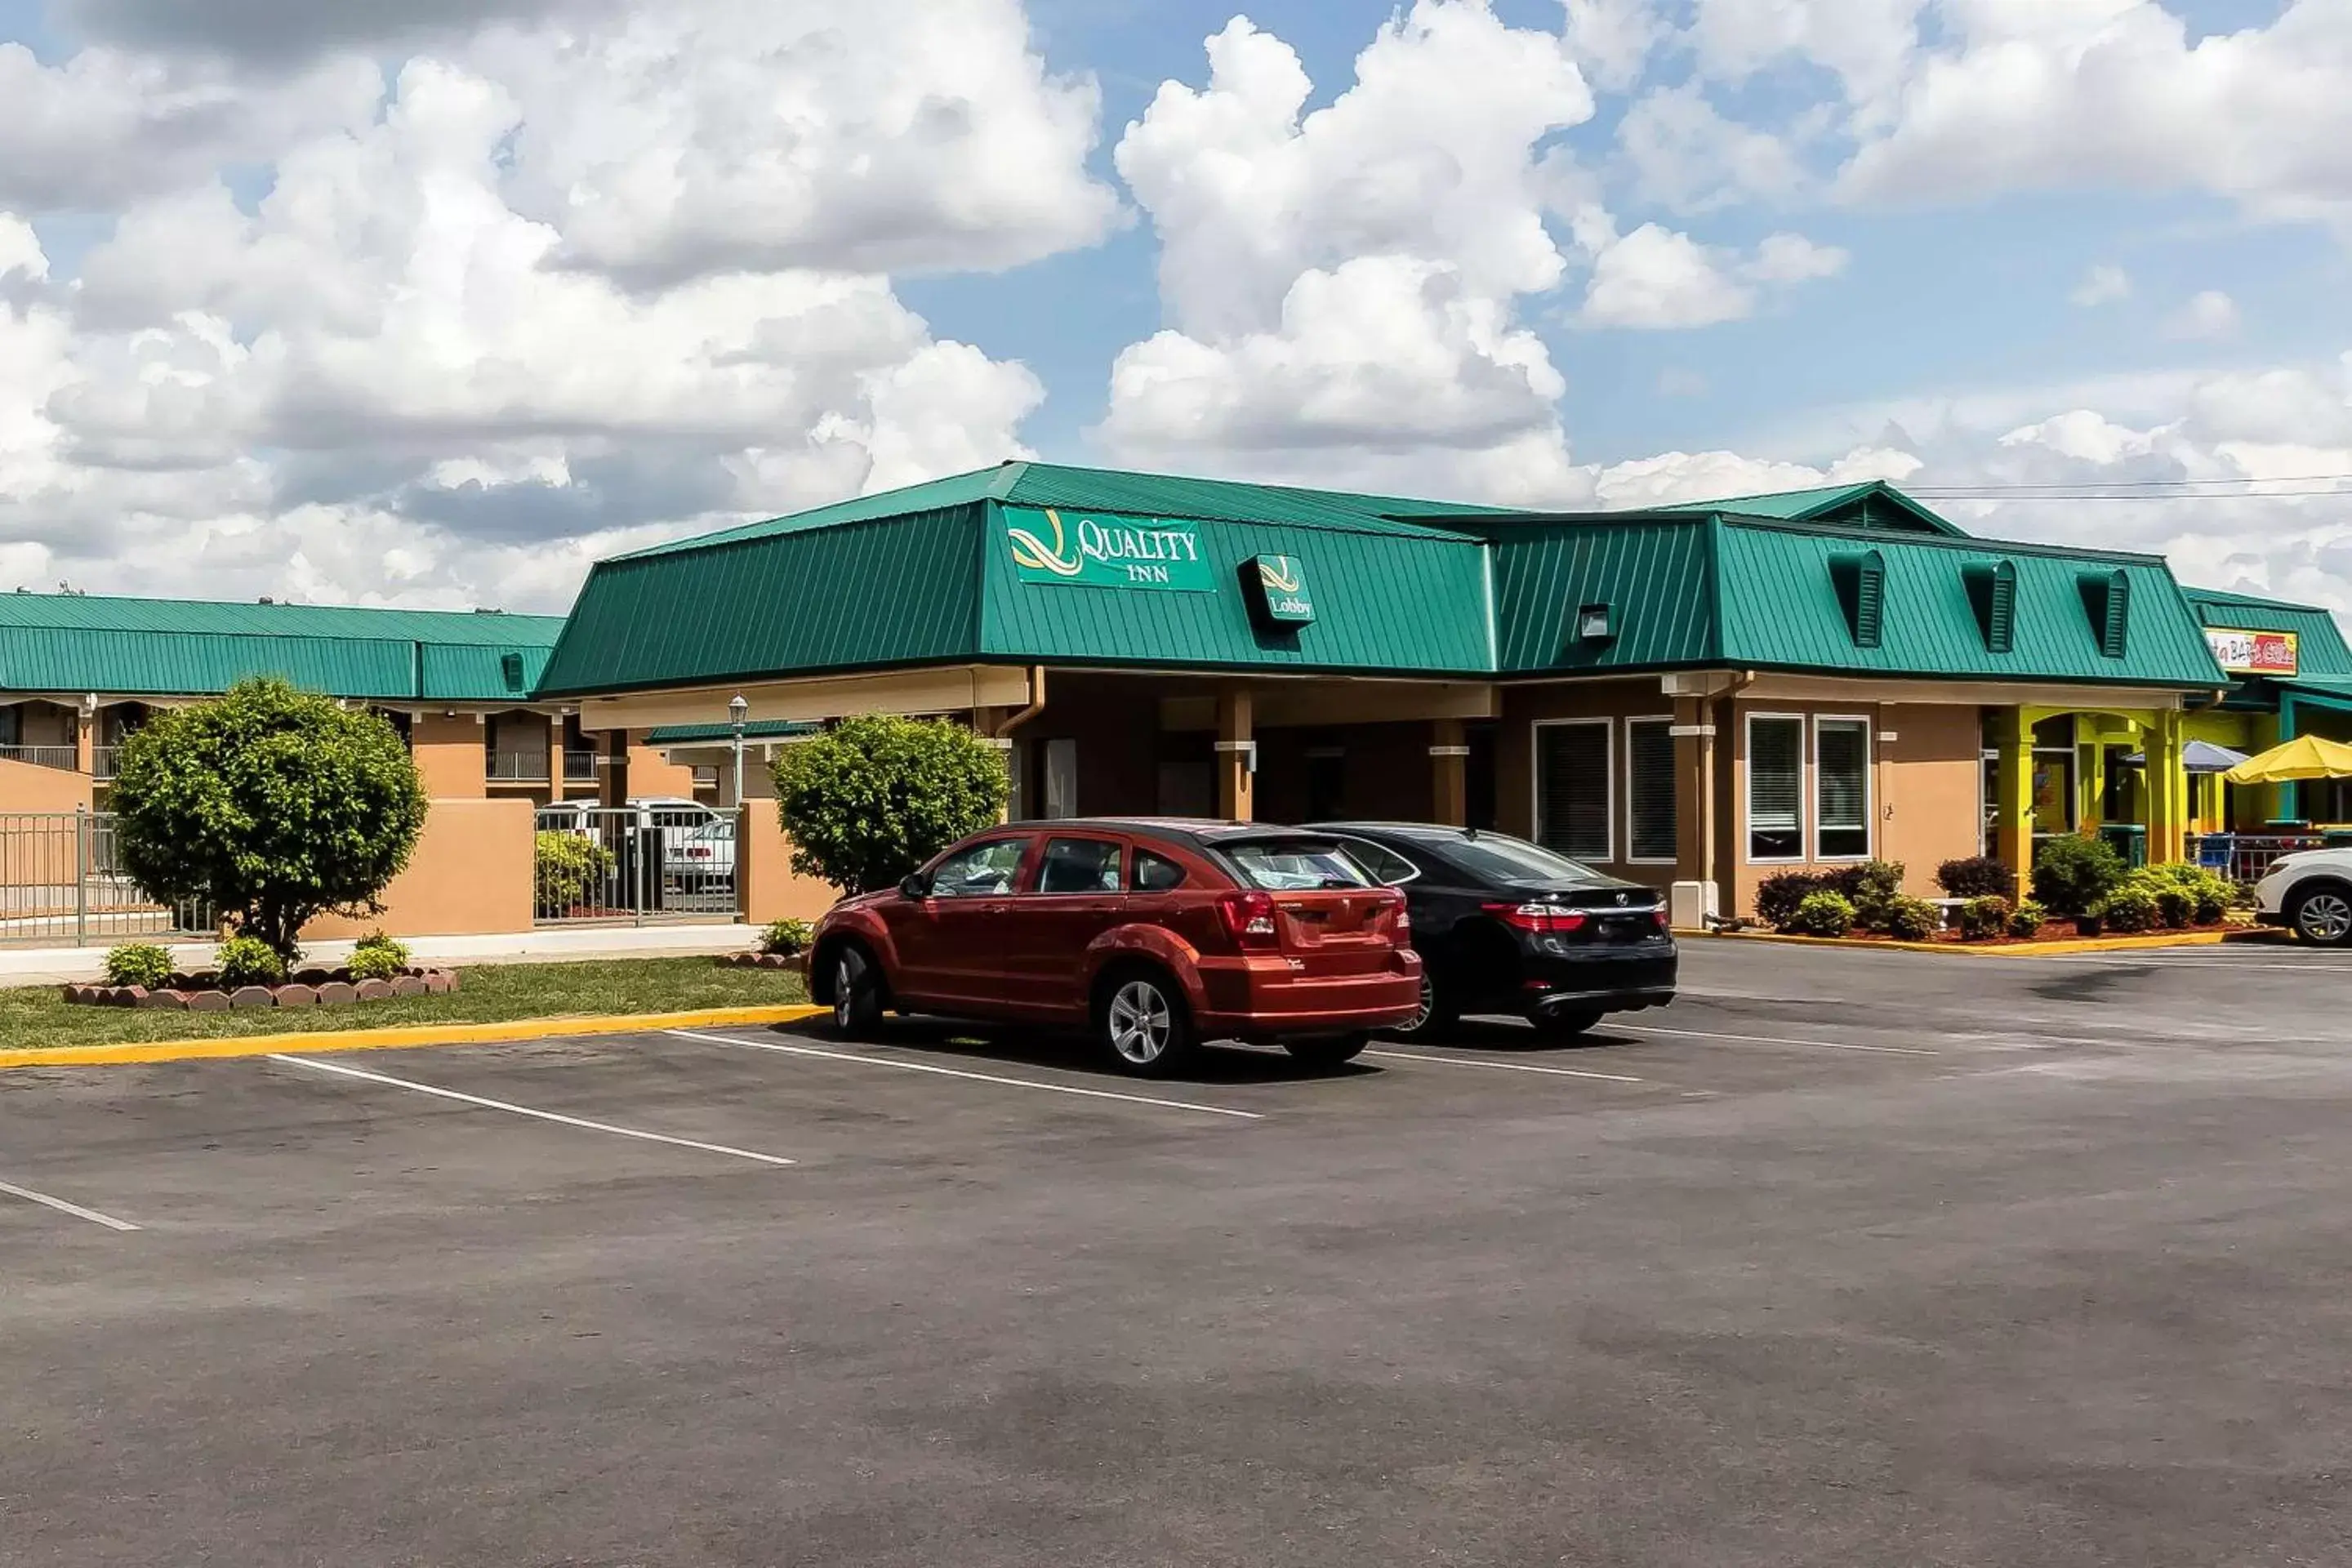 Property building in Quality Inn Tullahoma